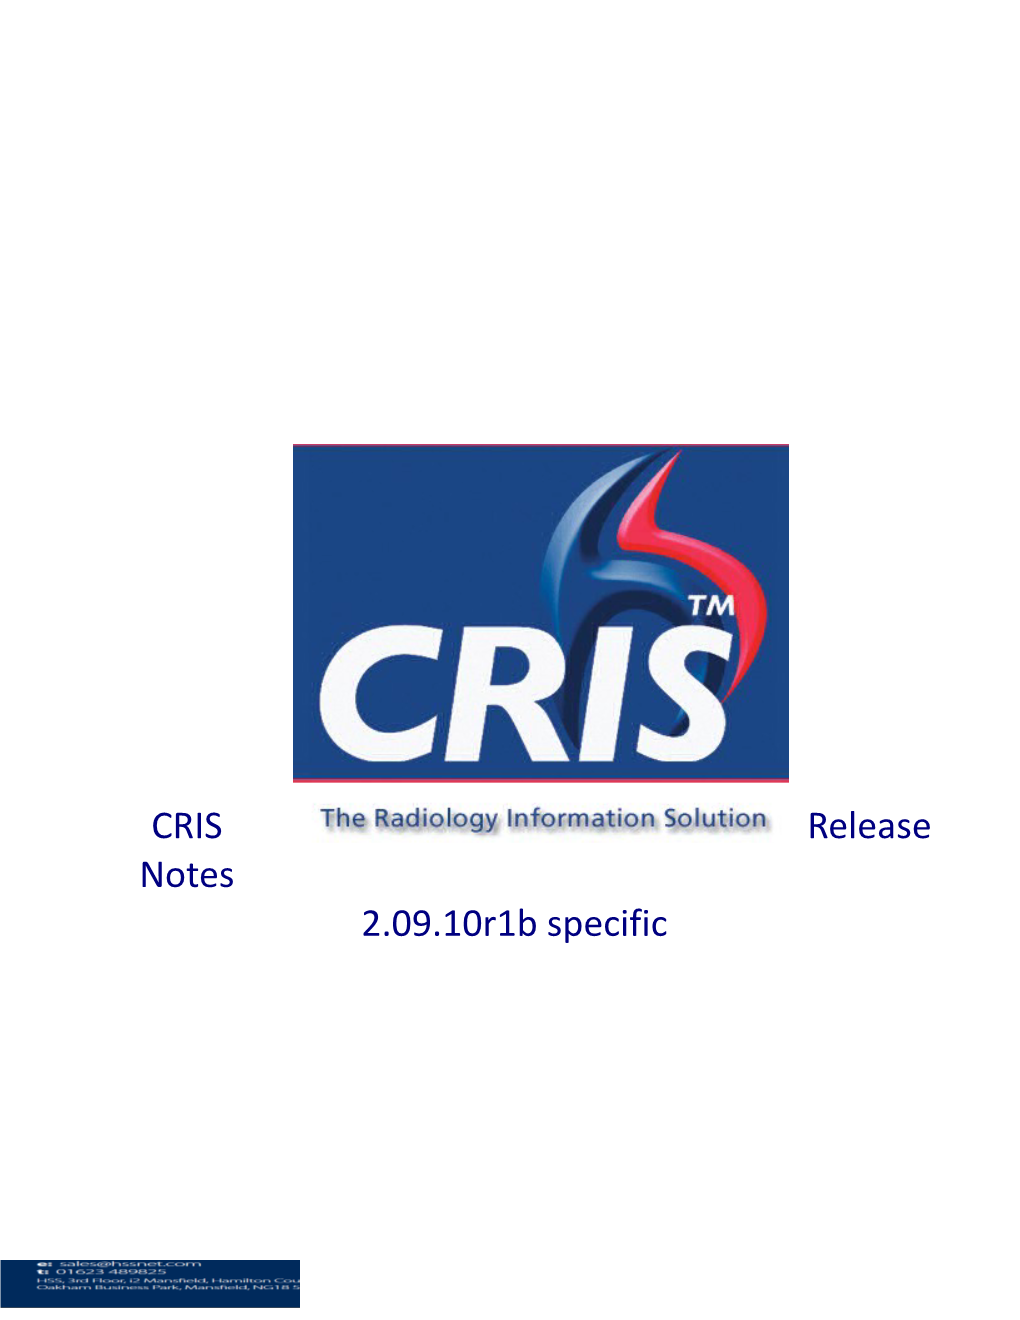 CRIS Release Notes 2.09.10R1b Specific